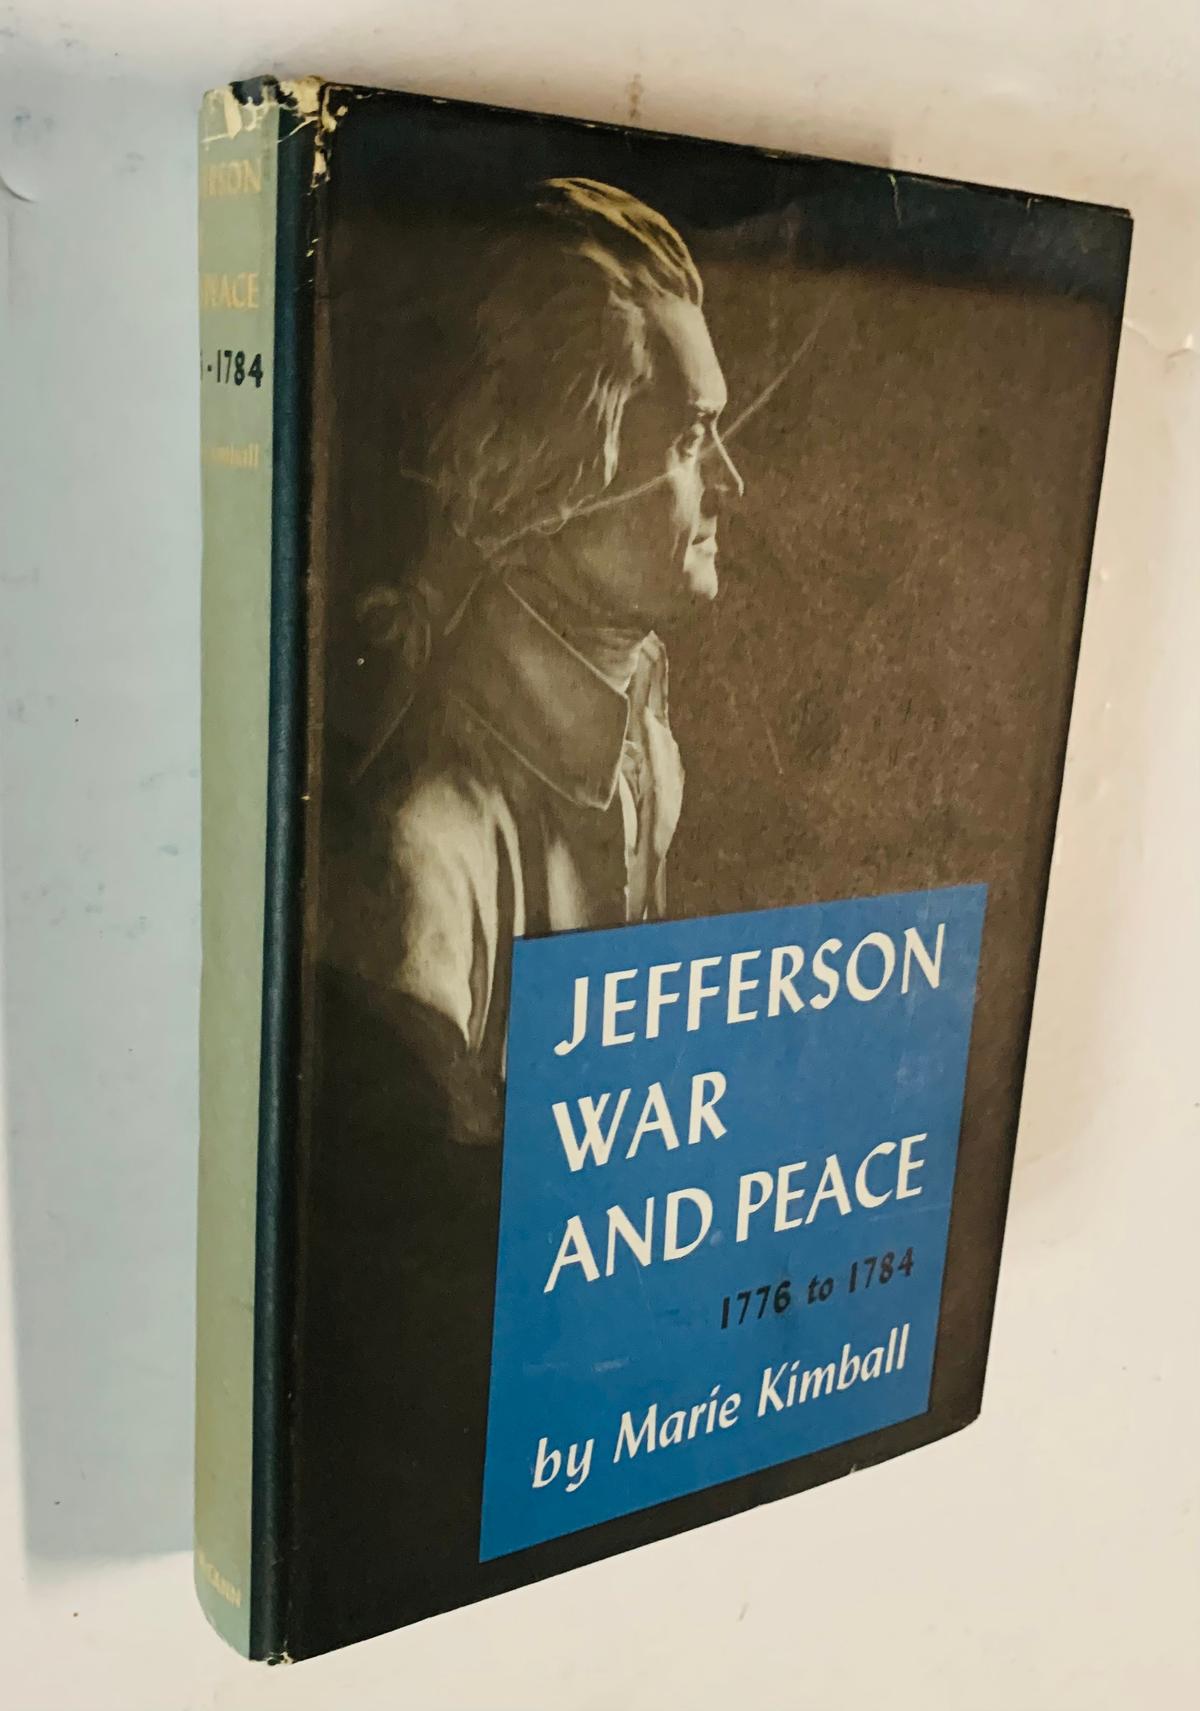 JEFFERSON War and Peace by Marie Kimball (1947)